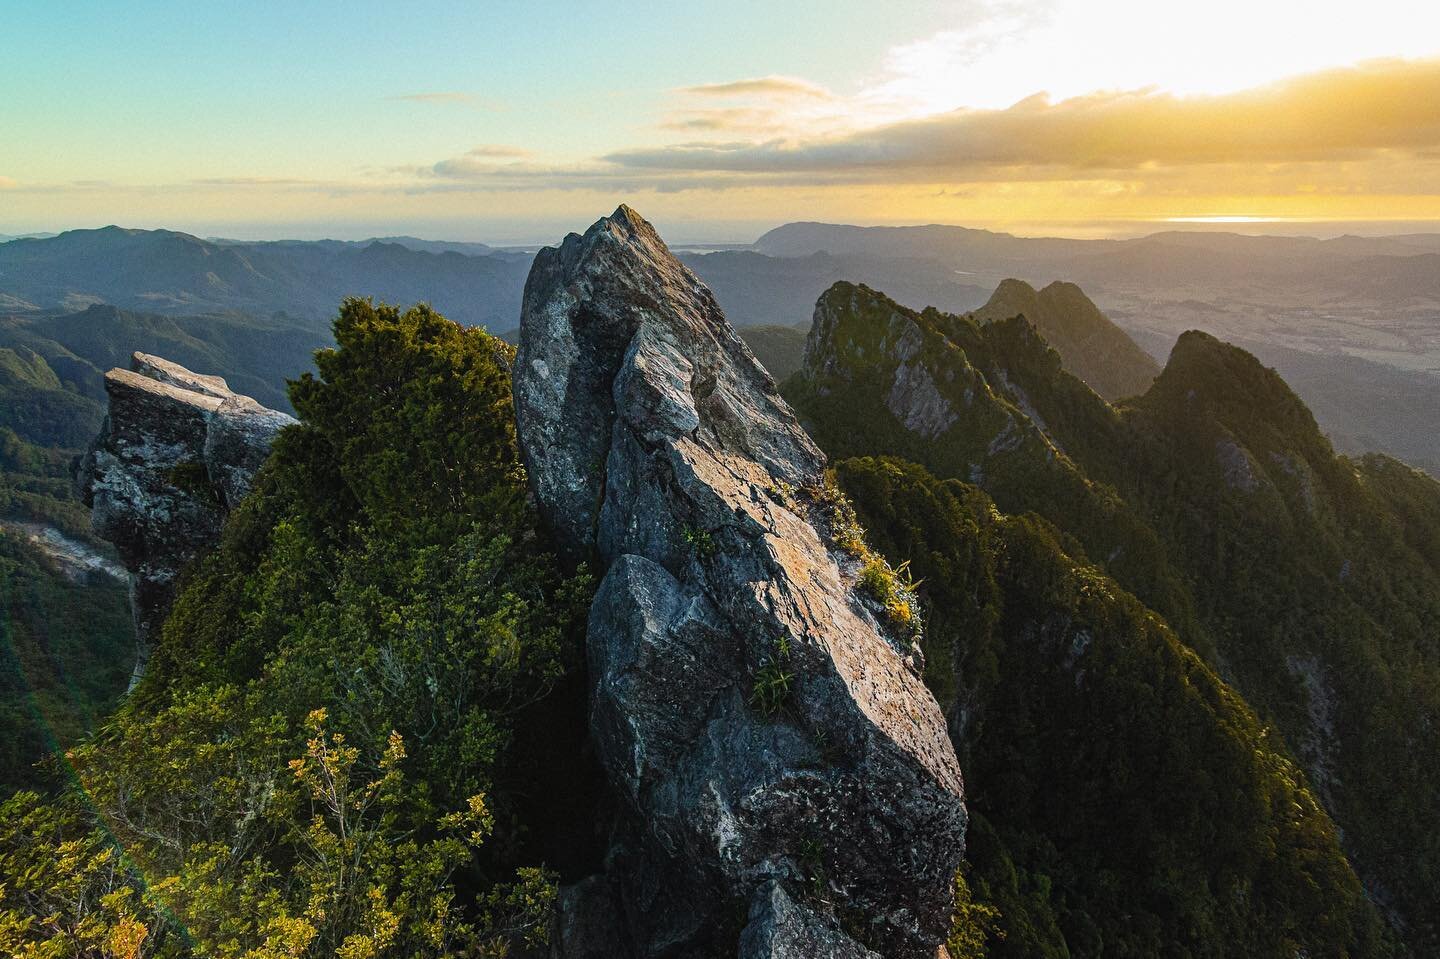 Sunrise from above the world. One of the most spectacular places I've managed to climb to. This is the summit of pinnacles at the top of the Kauaeranga Valley.
.
.
.
.
.
@purenewzealand @thecoromandel @landscape_photography_nz @landscapesnz #thepinna